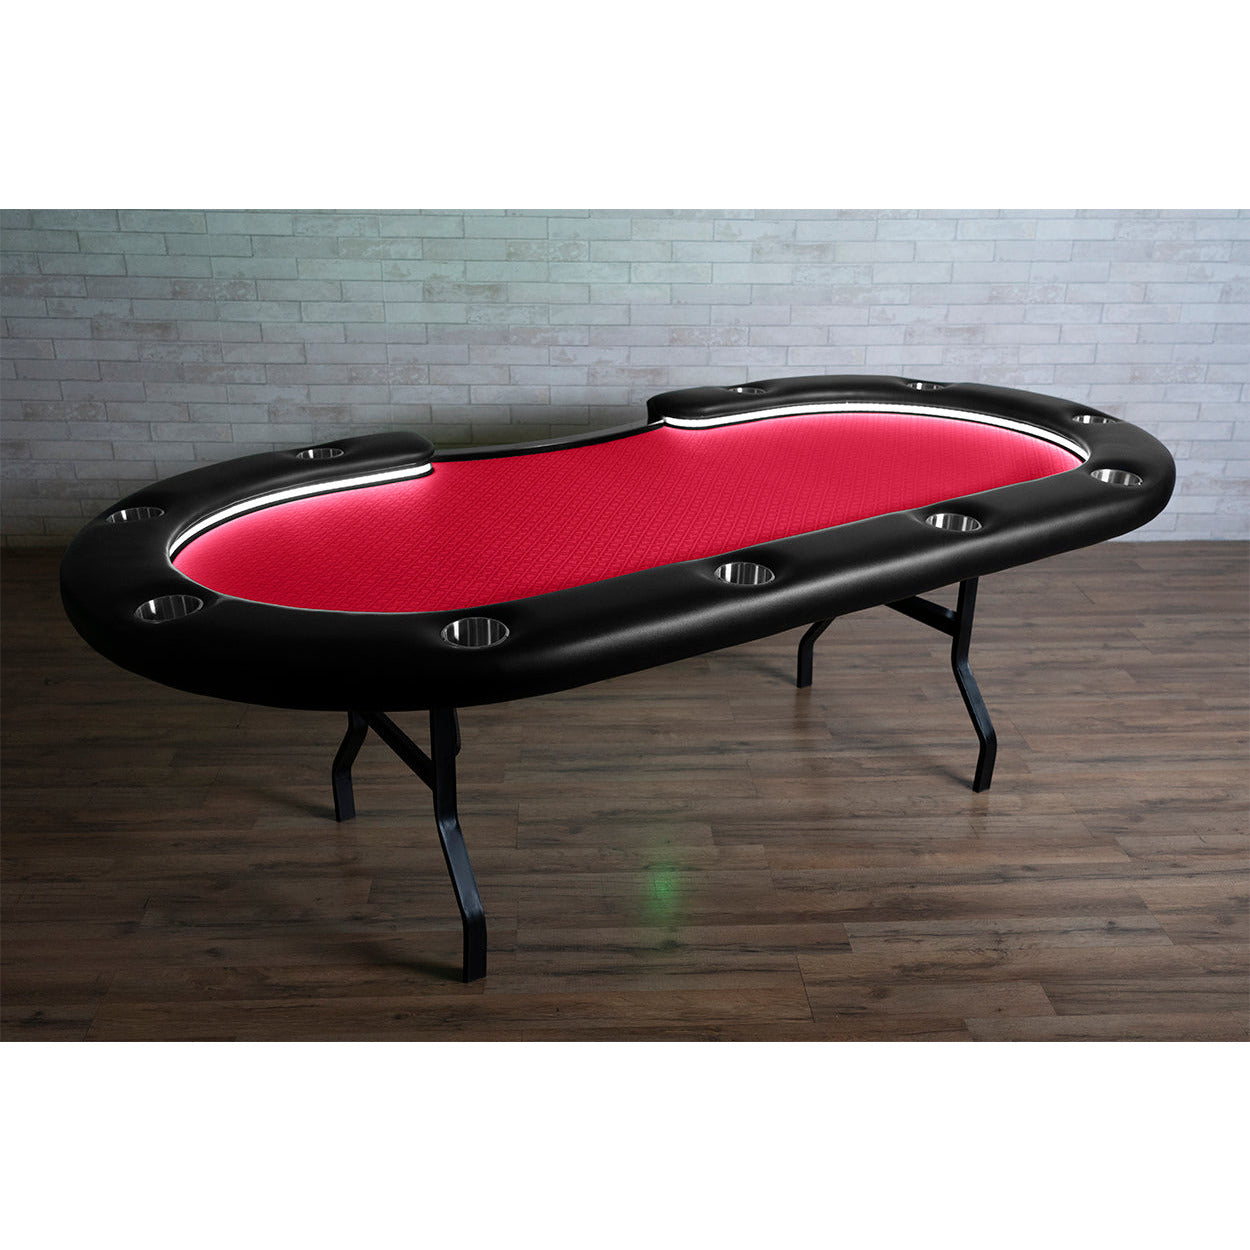 BBO The Aces Pro Alpha Folding Poker Table red speedcloth angle view 